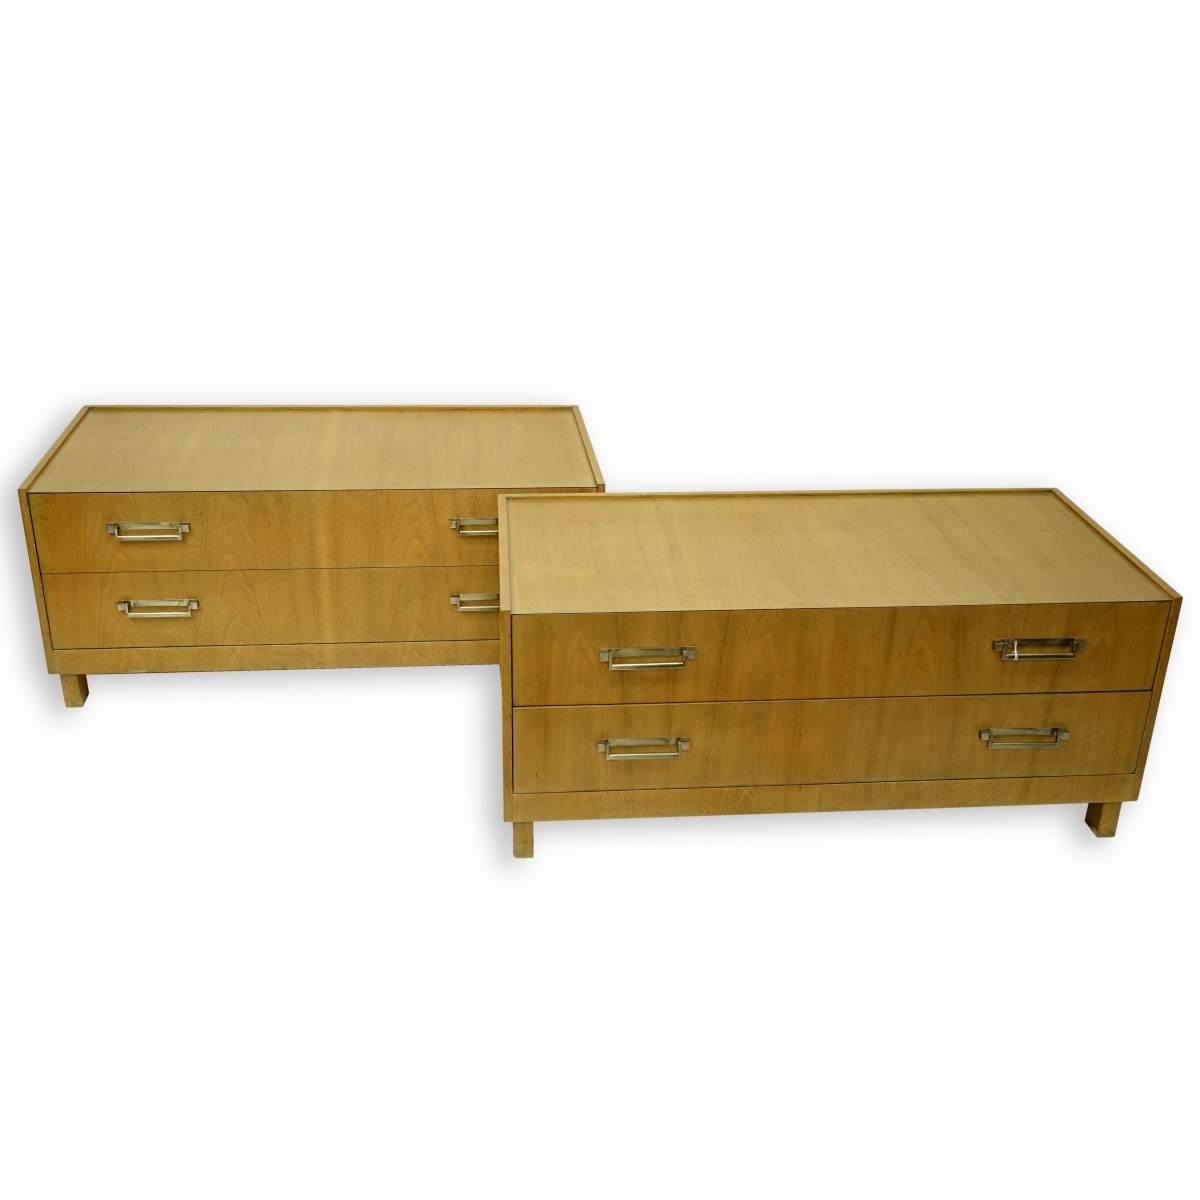 Pair of Bakers Furniture Night/End Tables